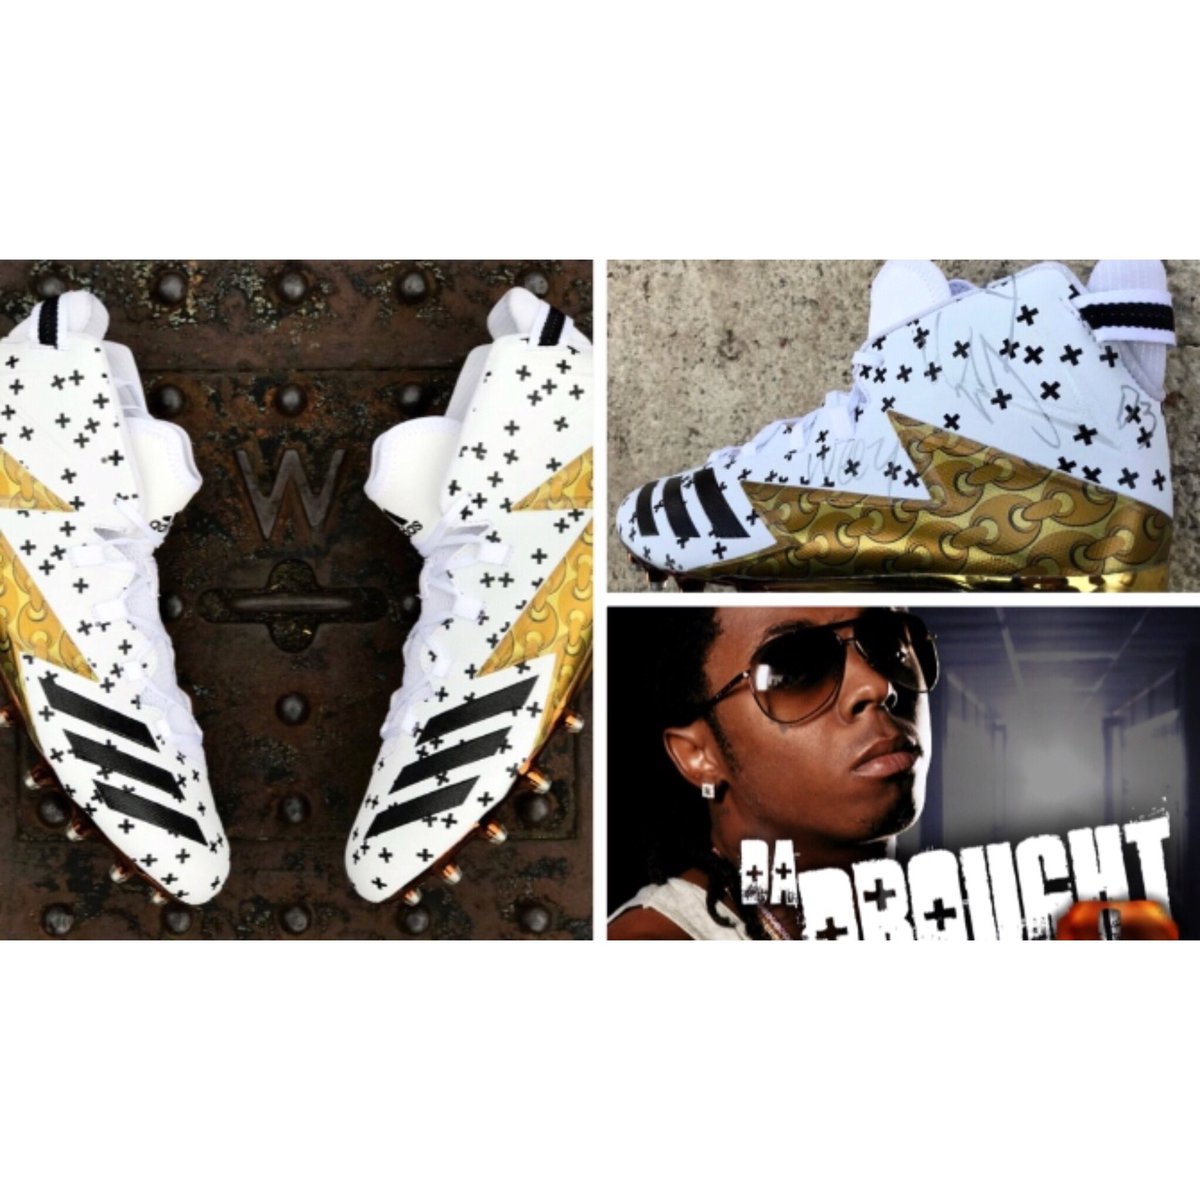 Shout out to my lil bro @vonmiller for creating the cleats dedicated 2 Da Drought 3!! Luv! @adidas #youngmoney https://t.co/CNYLssAS0Y